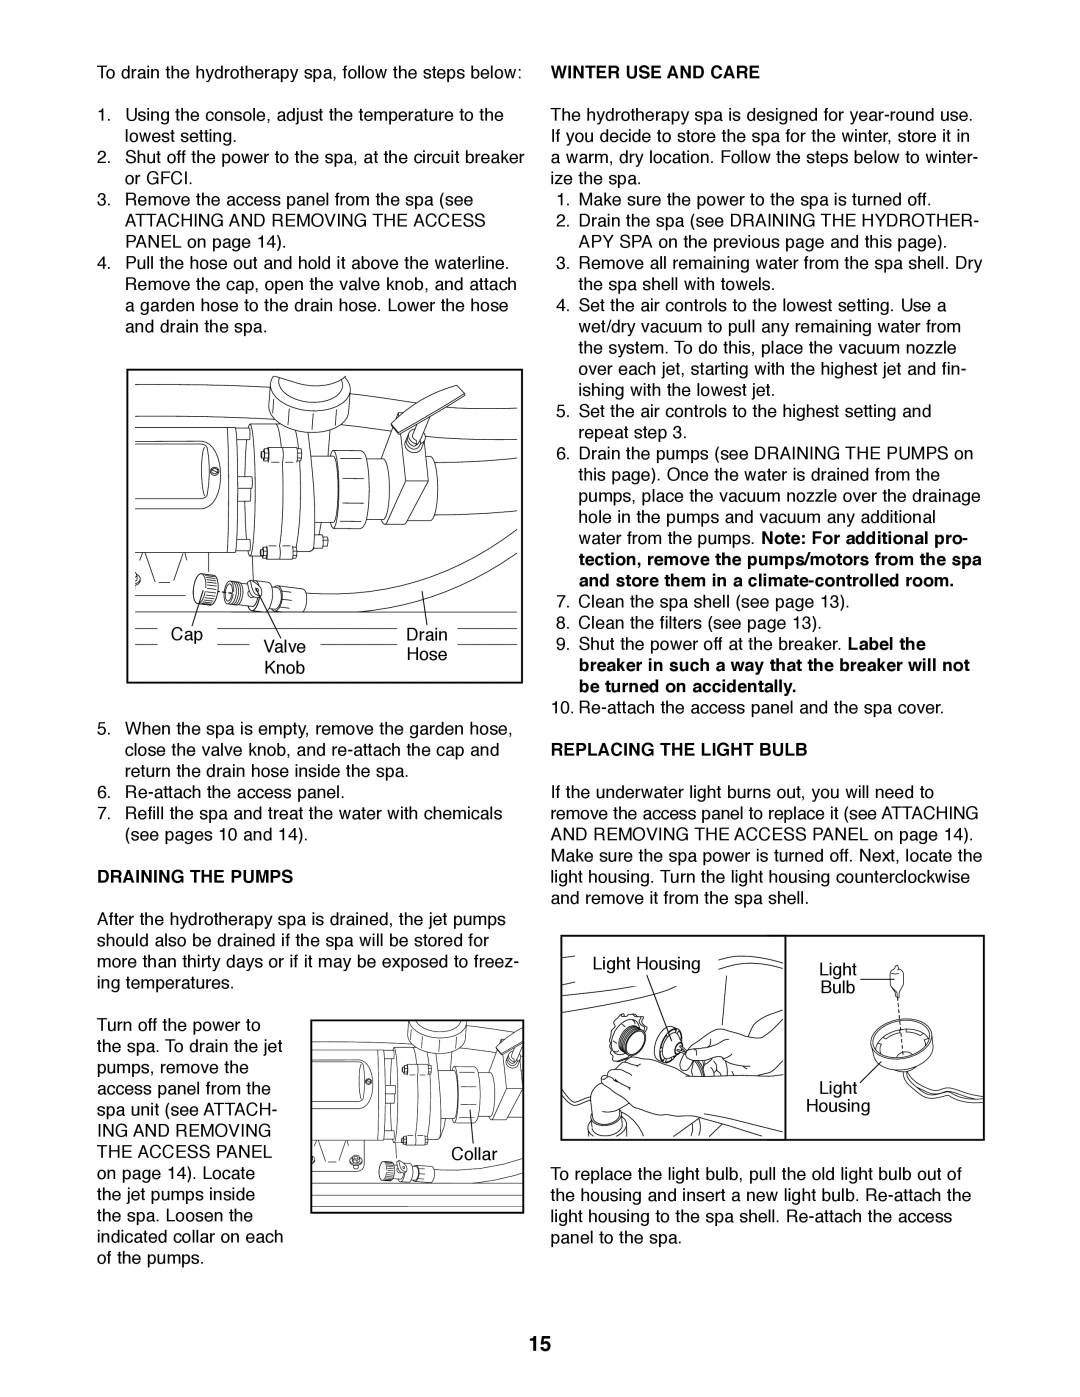 Image IMSW73910 user manual Draining The Pumps, Replacing The Light Bulb 